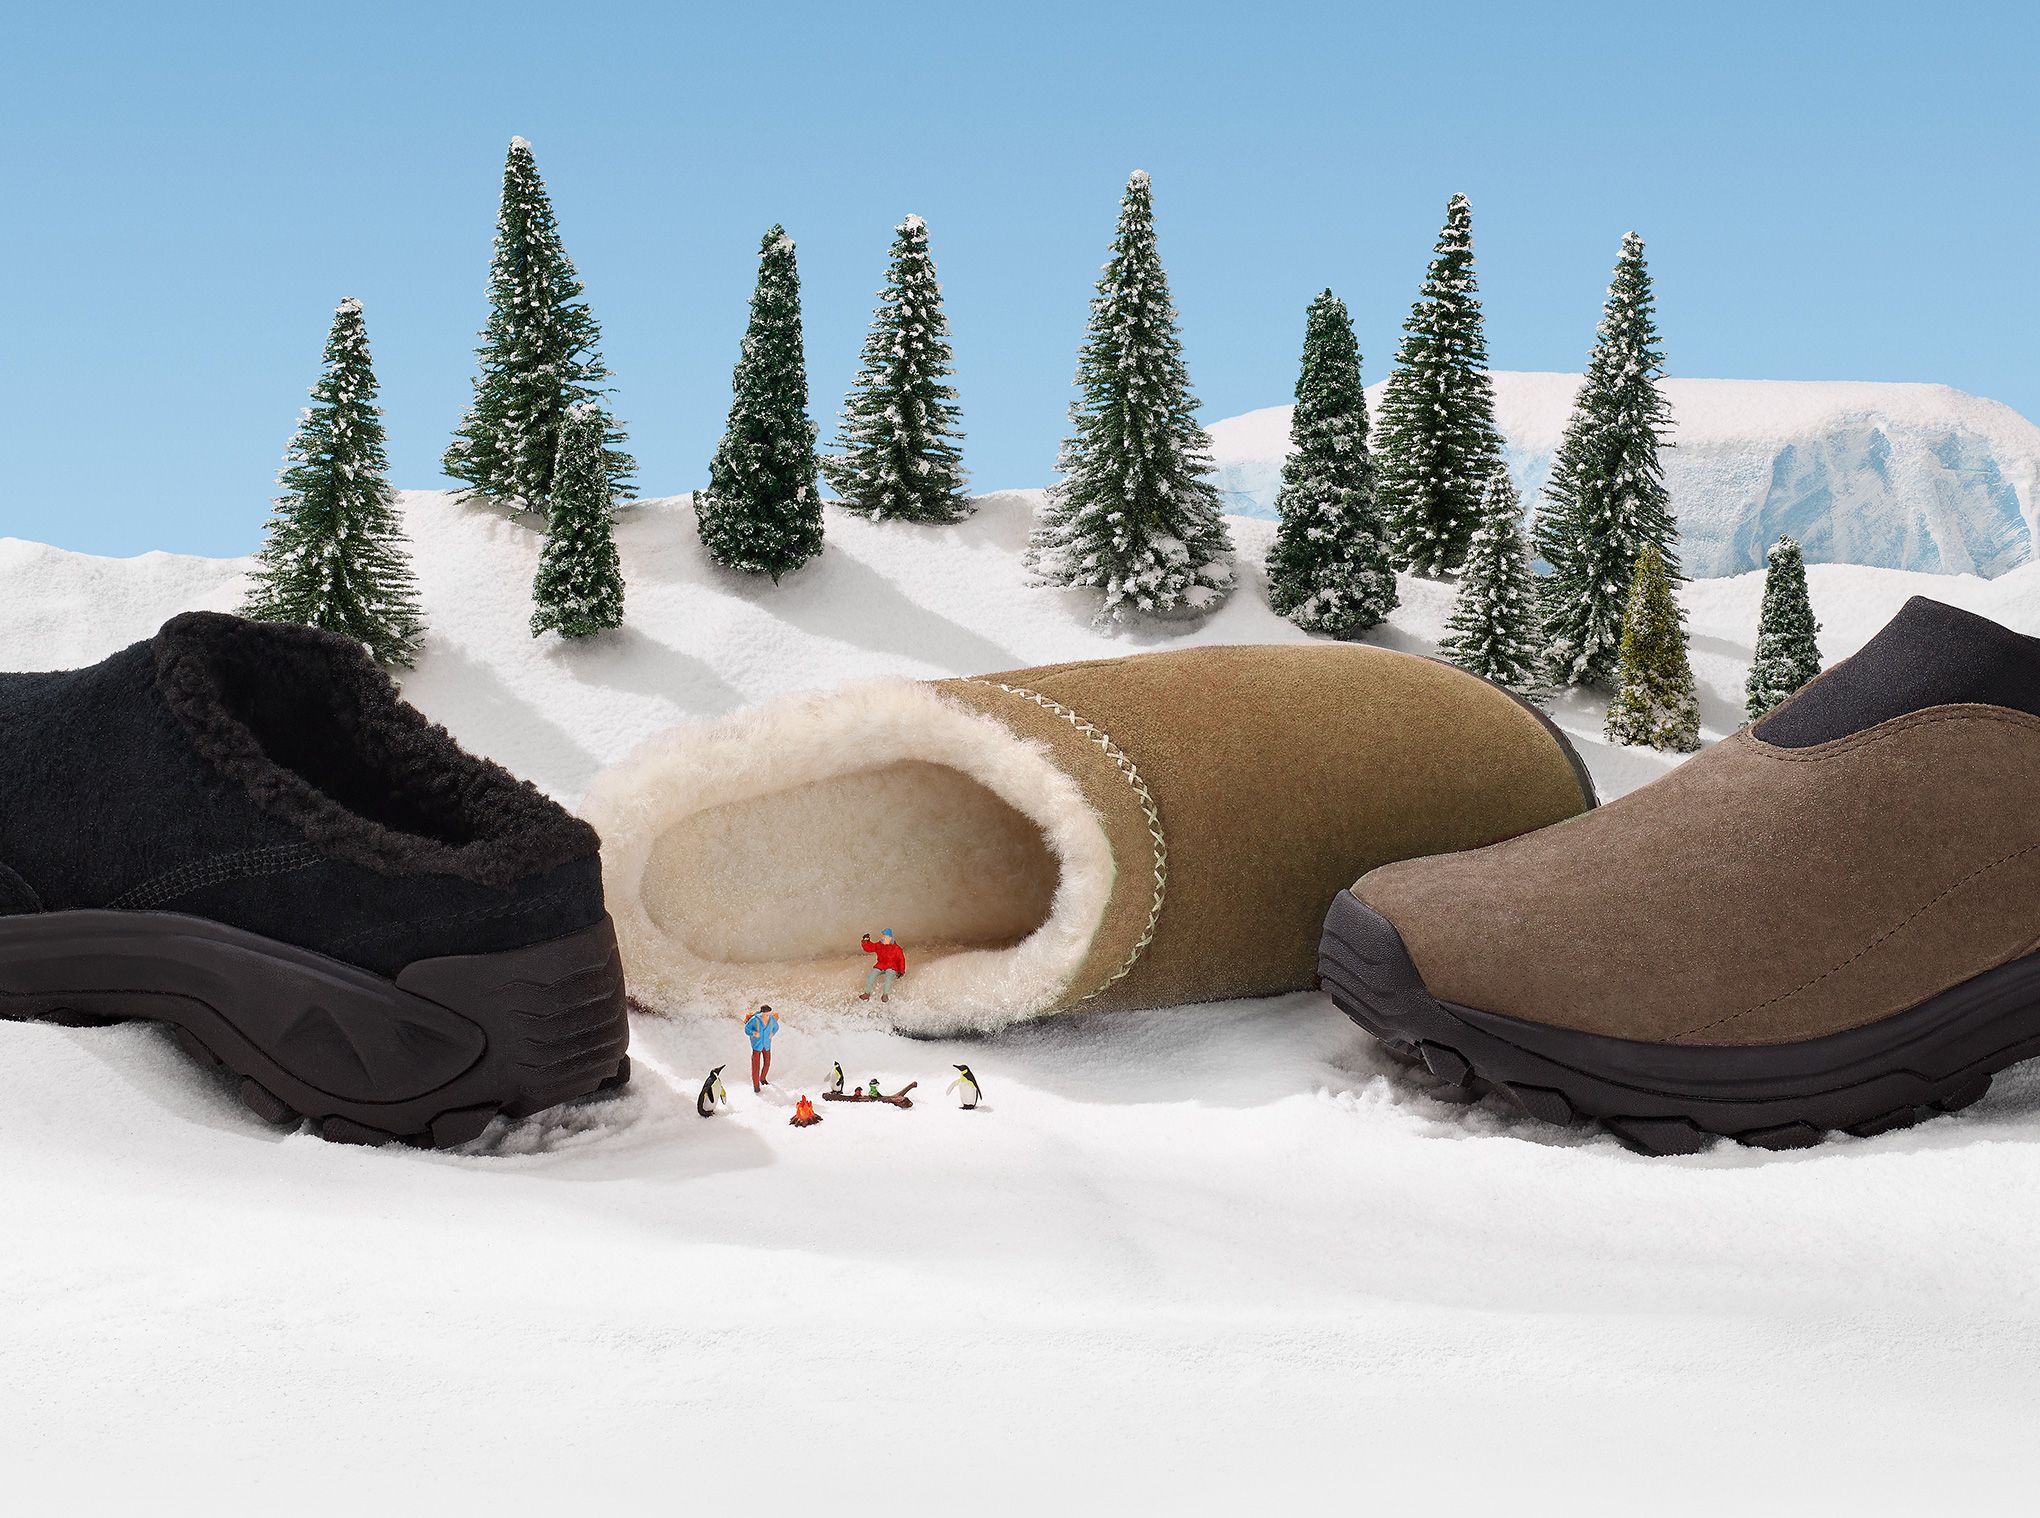 A group of Merrell shoes in the snow.